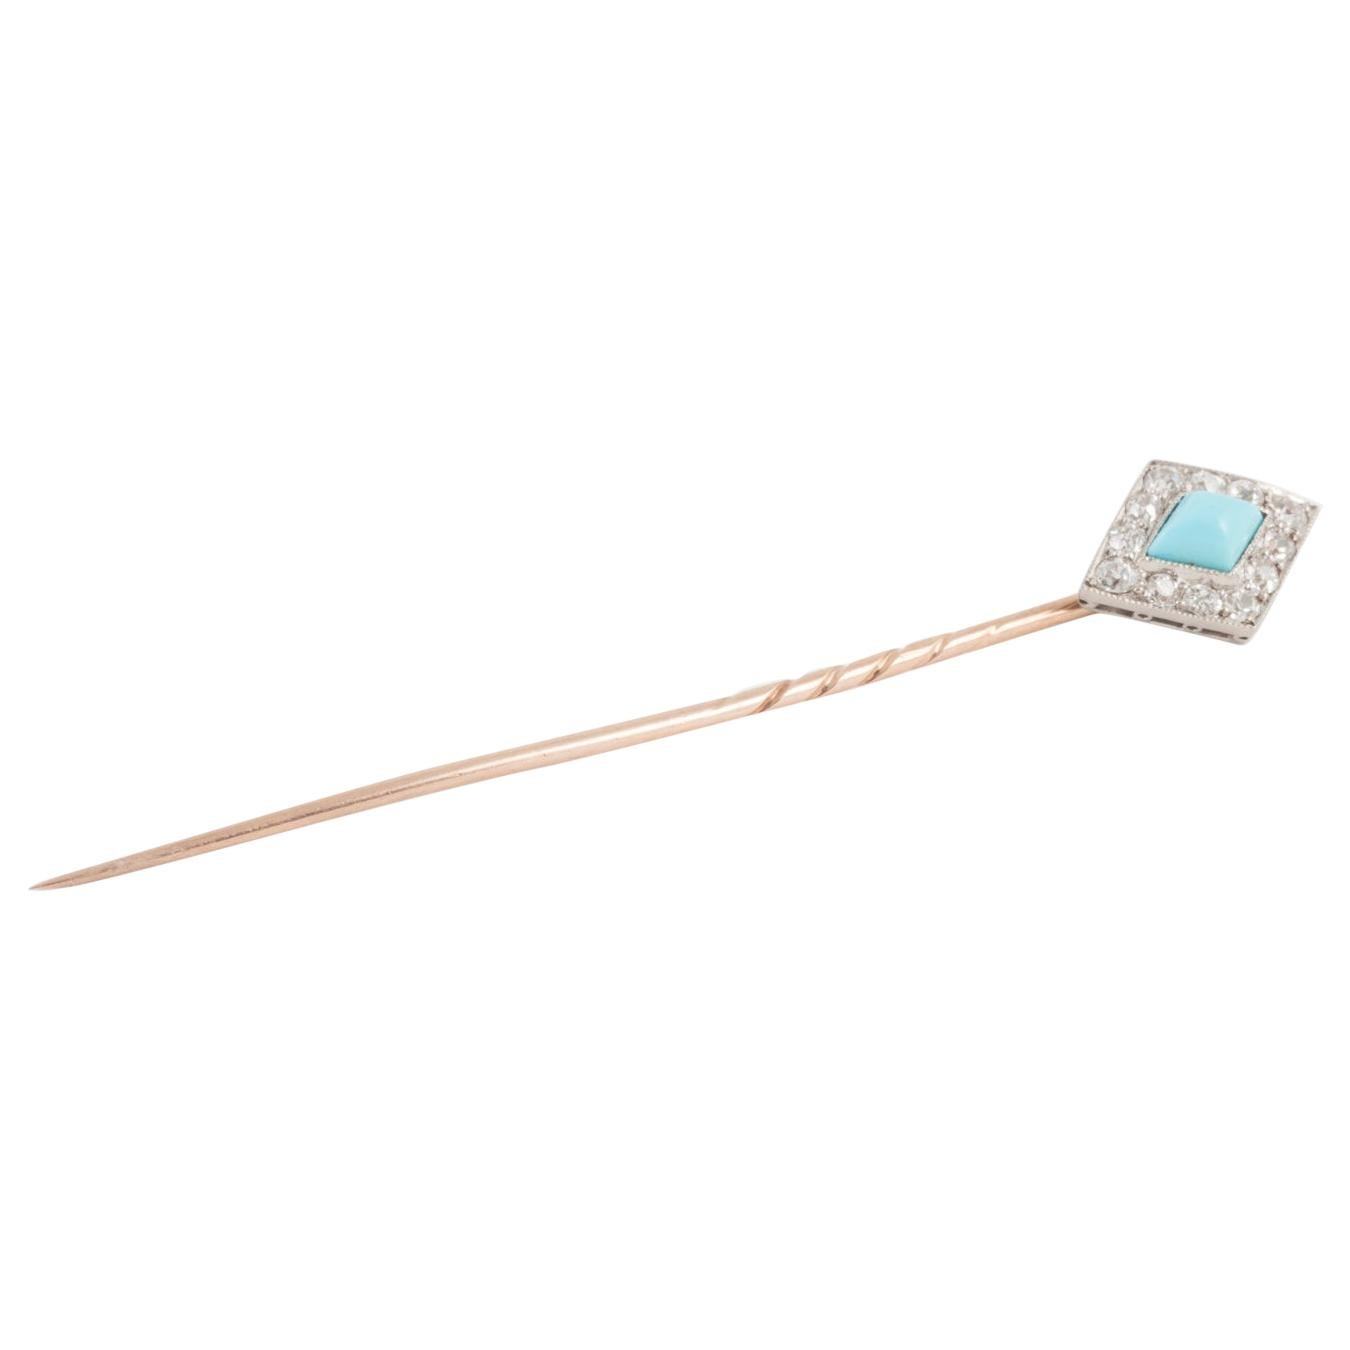 Diamond & Turquoise Tie or Lapel Pin in Platinum and Gold, English circa 1890 For Sale